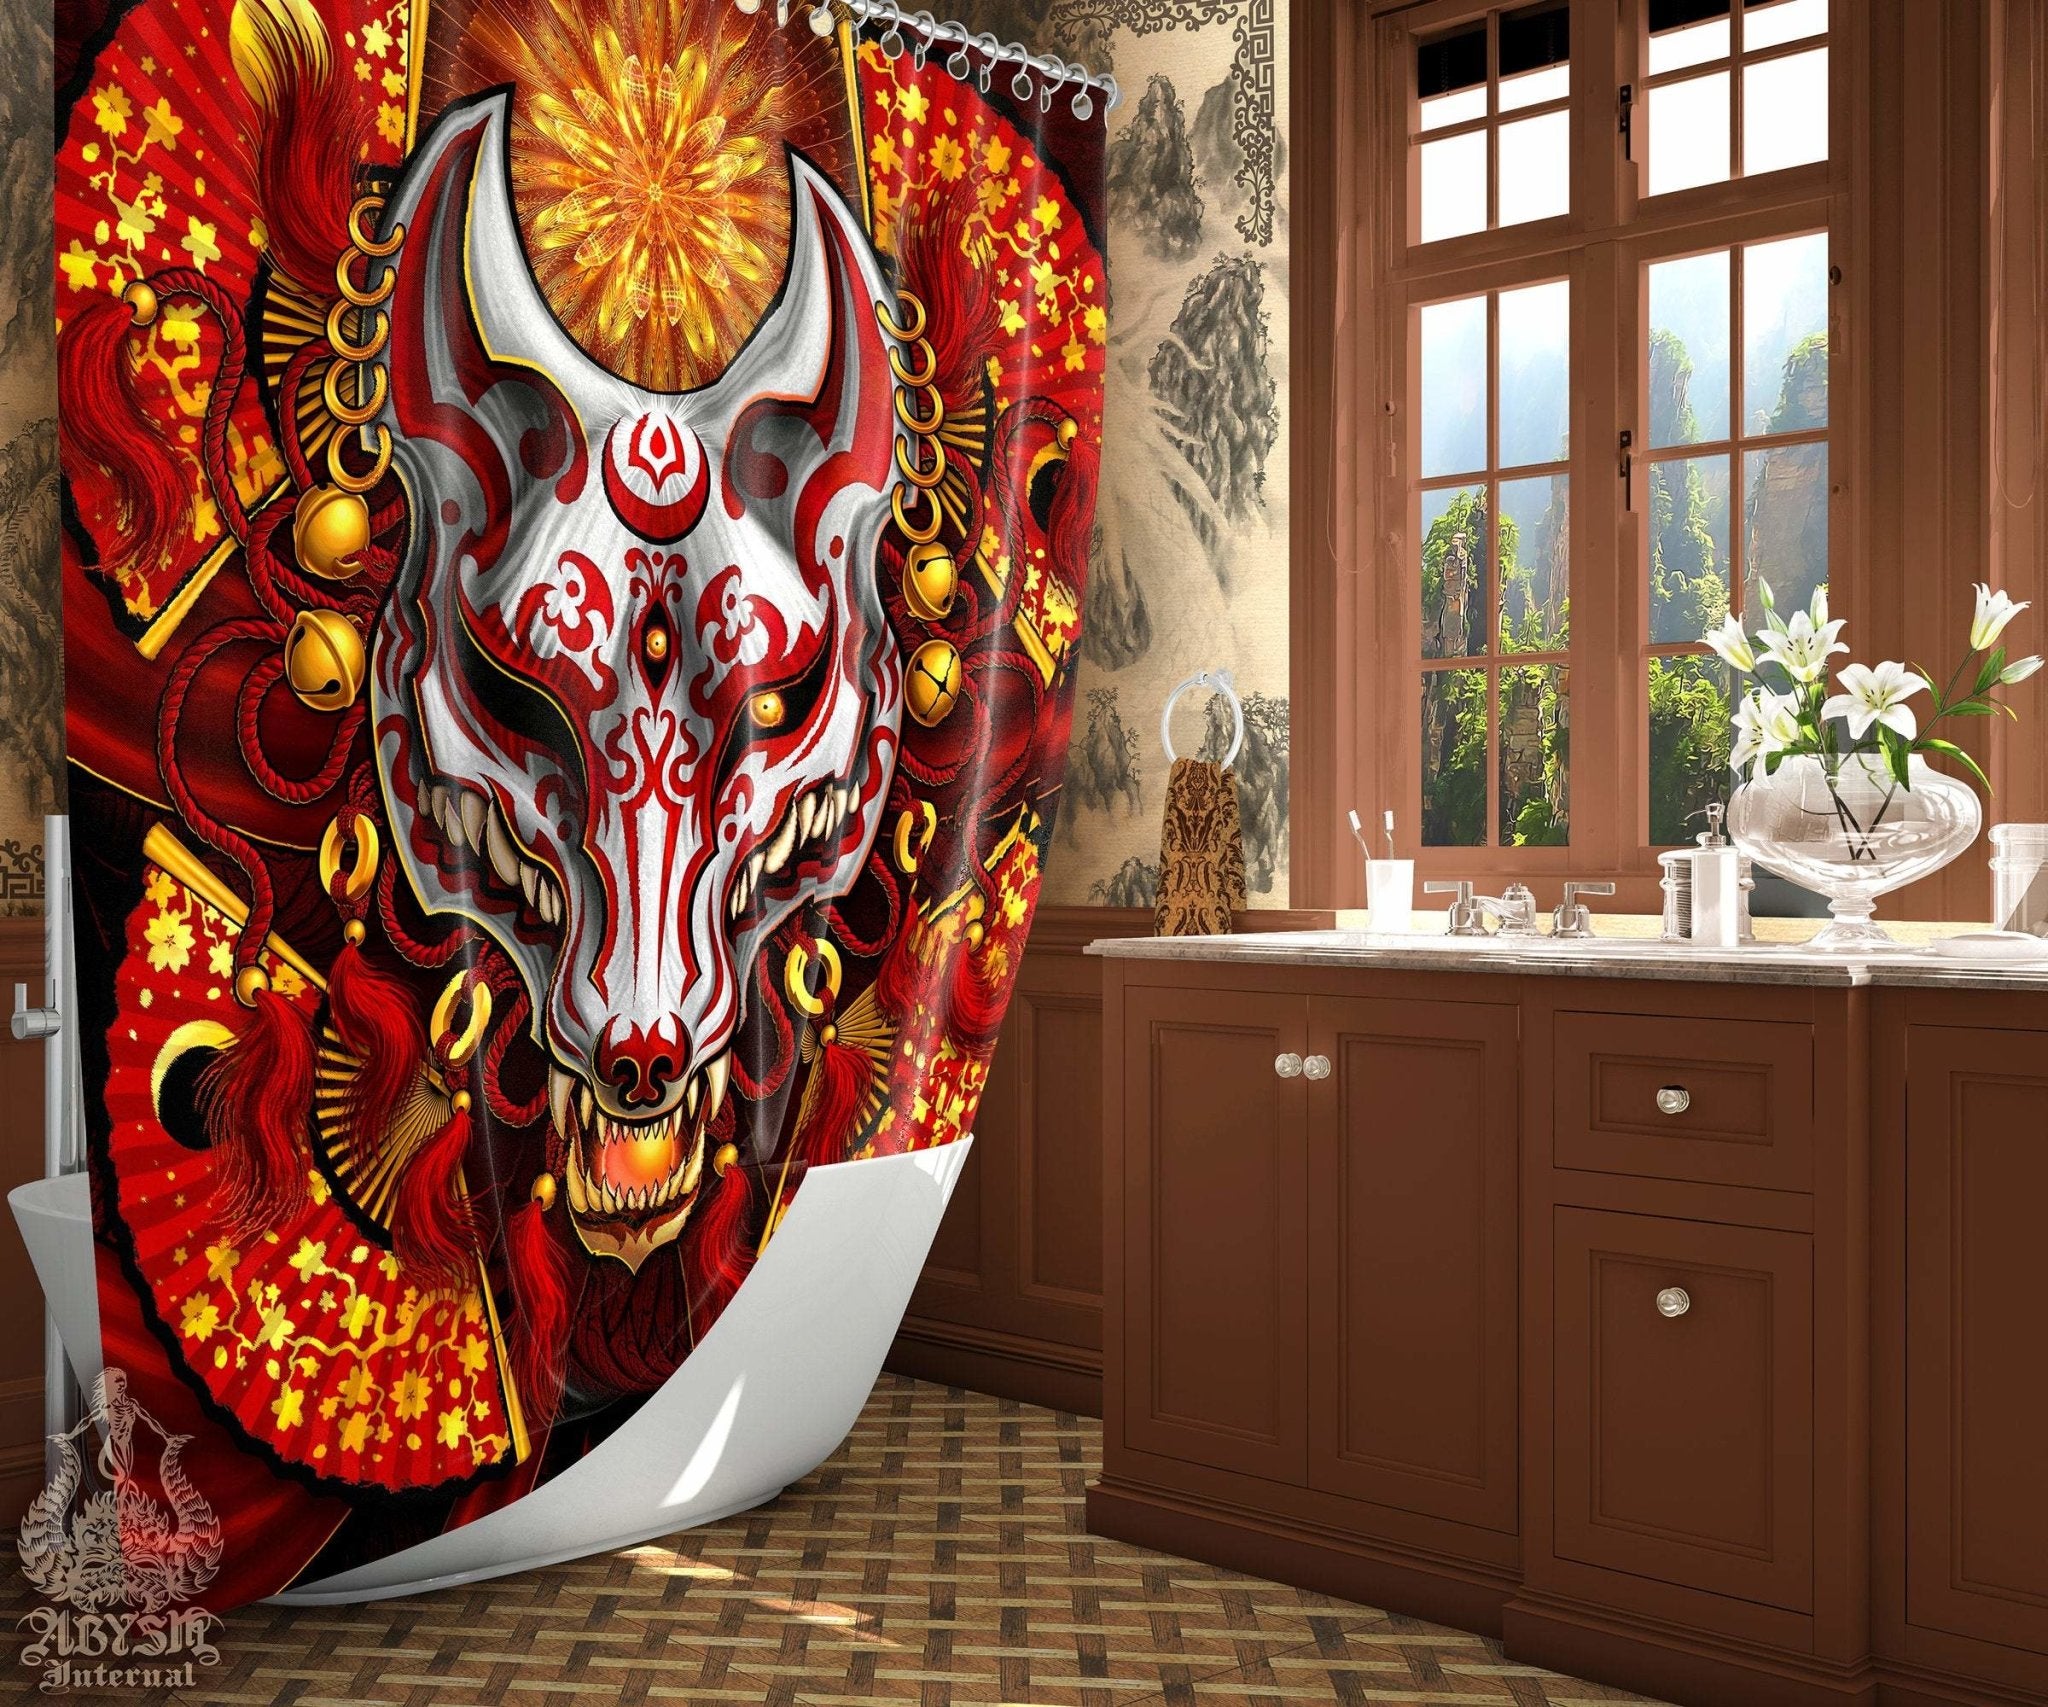 Kitsune Shower Curtain, Japanese Fox Mask, Okami, Anime and Gamer Bathroom Decor, Eclectic and Funky Home - Red & White - Abysm Internal